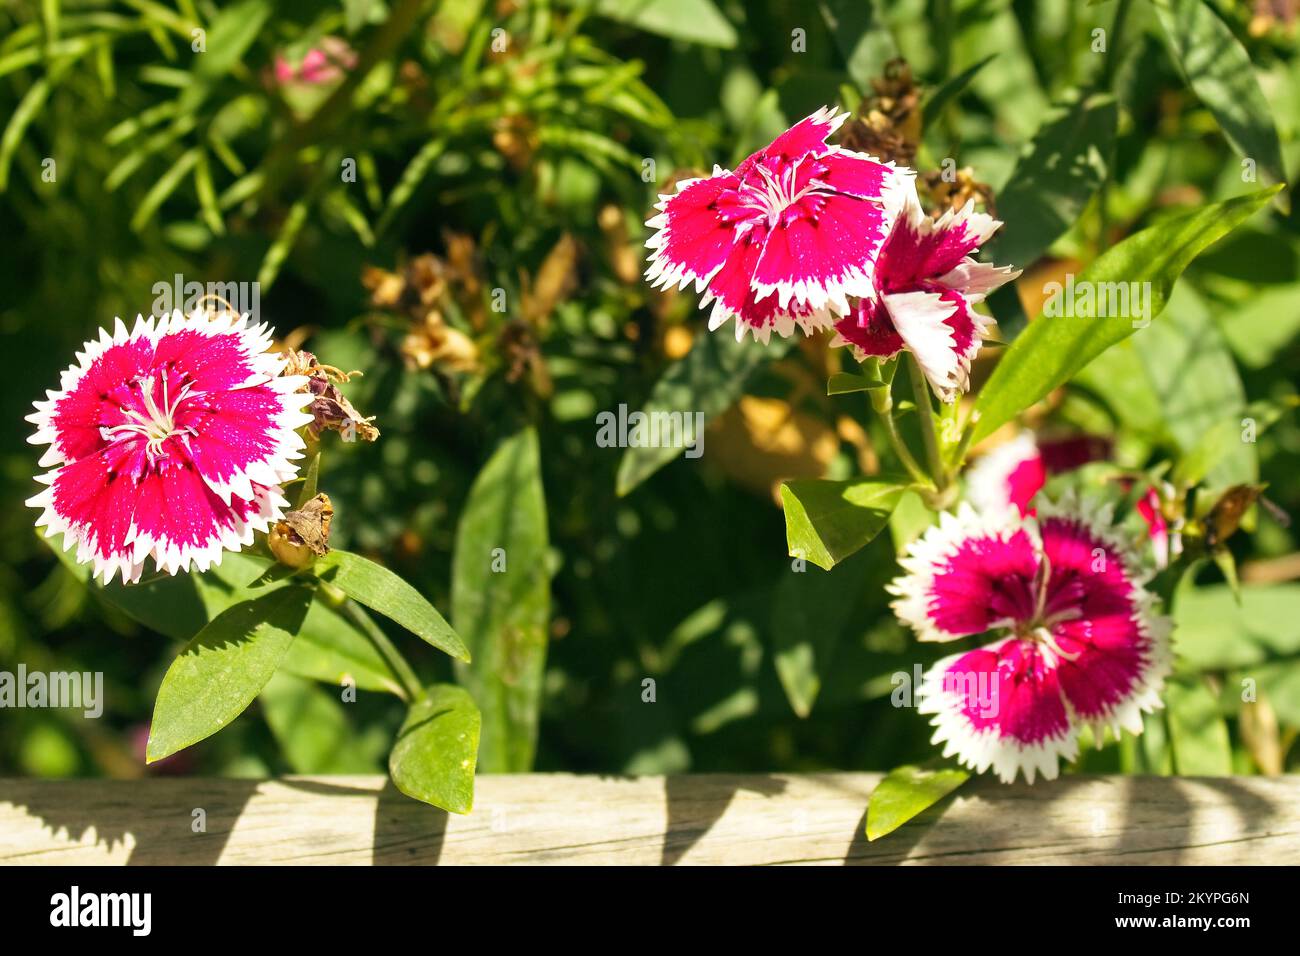 portrait of flower dianthus chinensis, japanese carnation Stock Photo